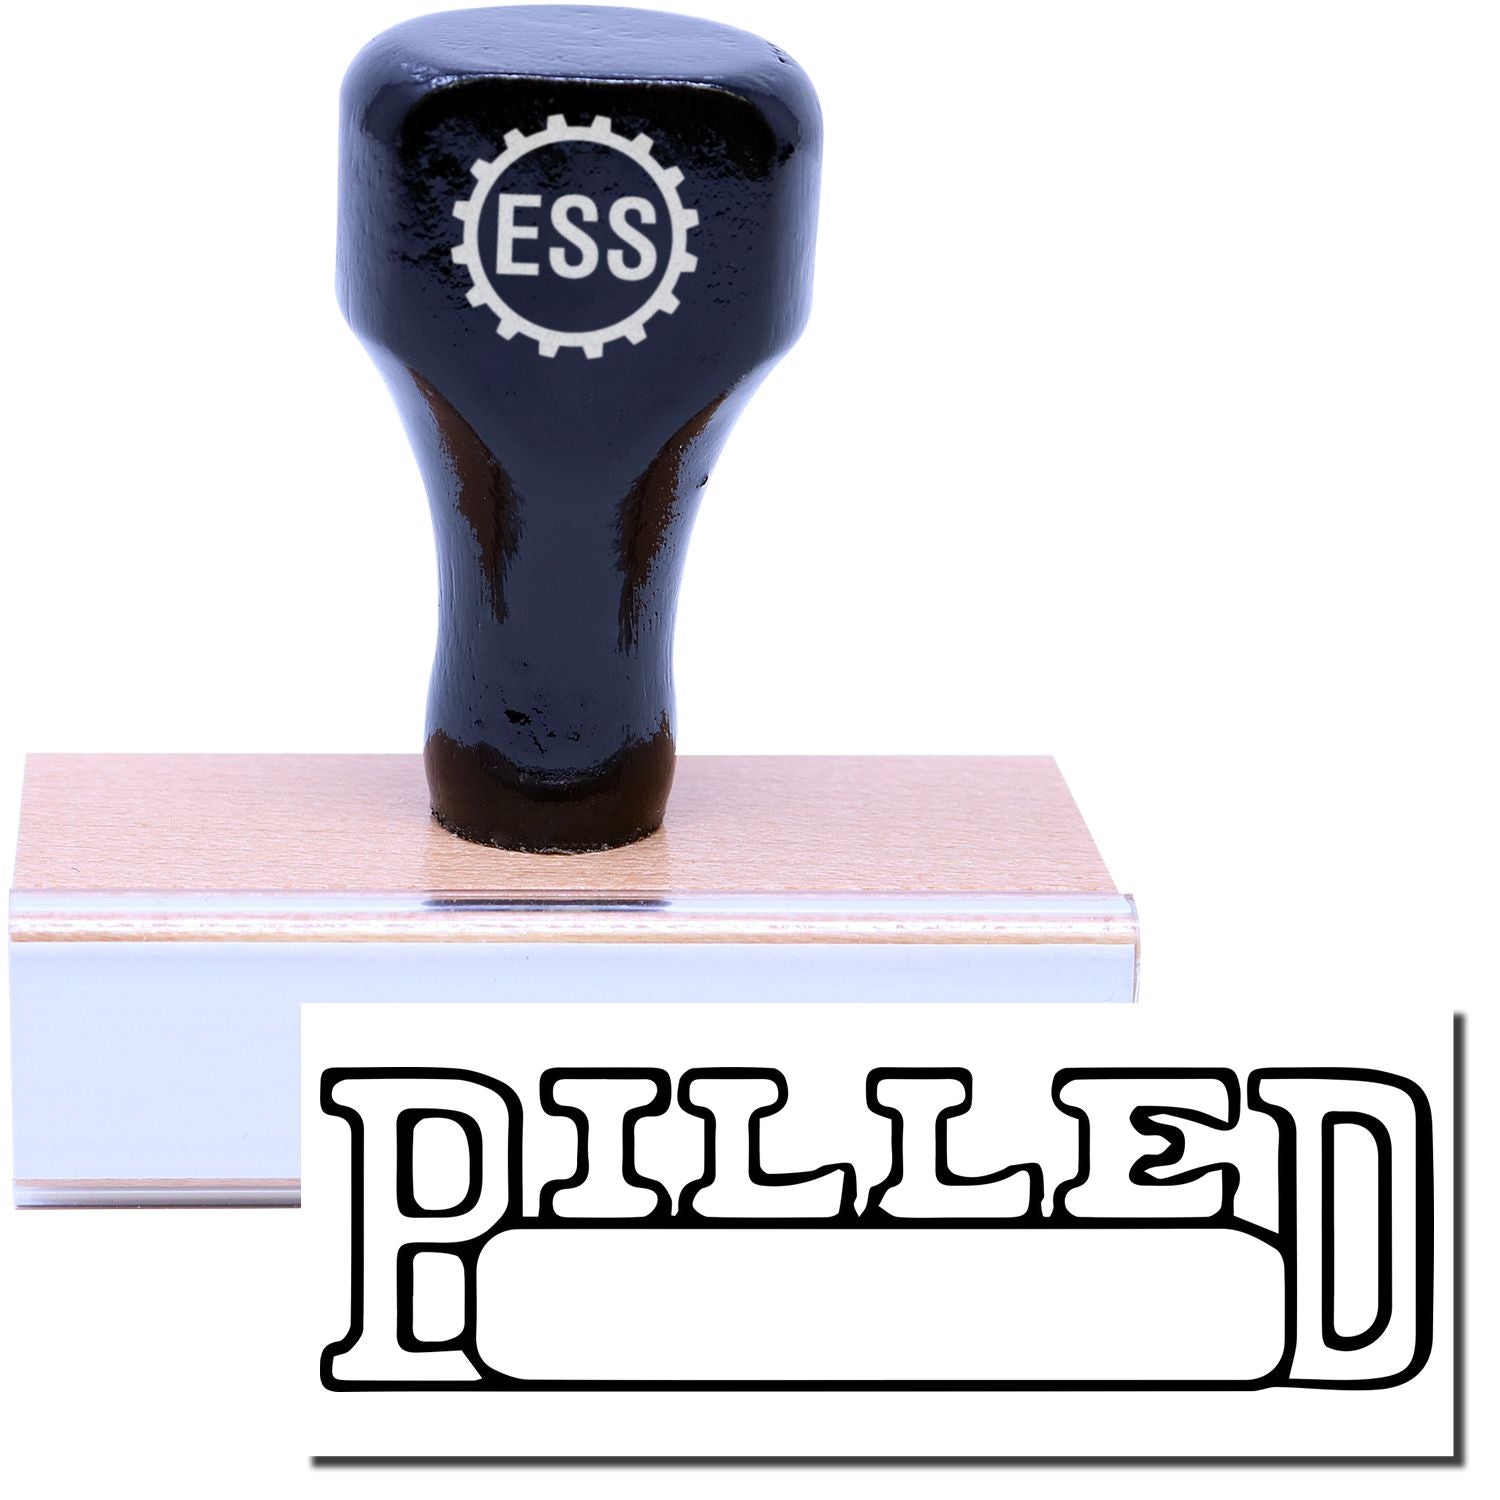 A stock office rubber stamp with a stamped image showing how the text "BILLED" in an outline font with a date box is displayed after stamping.